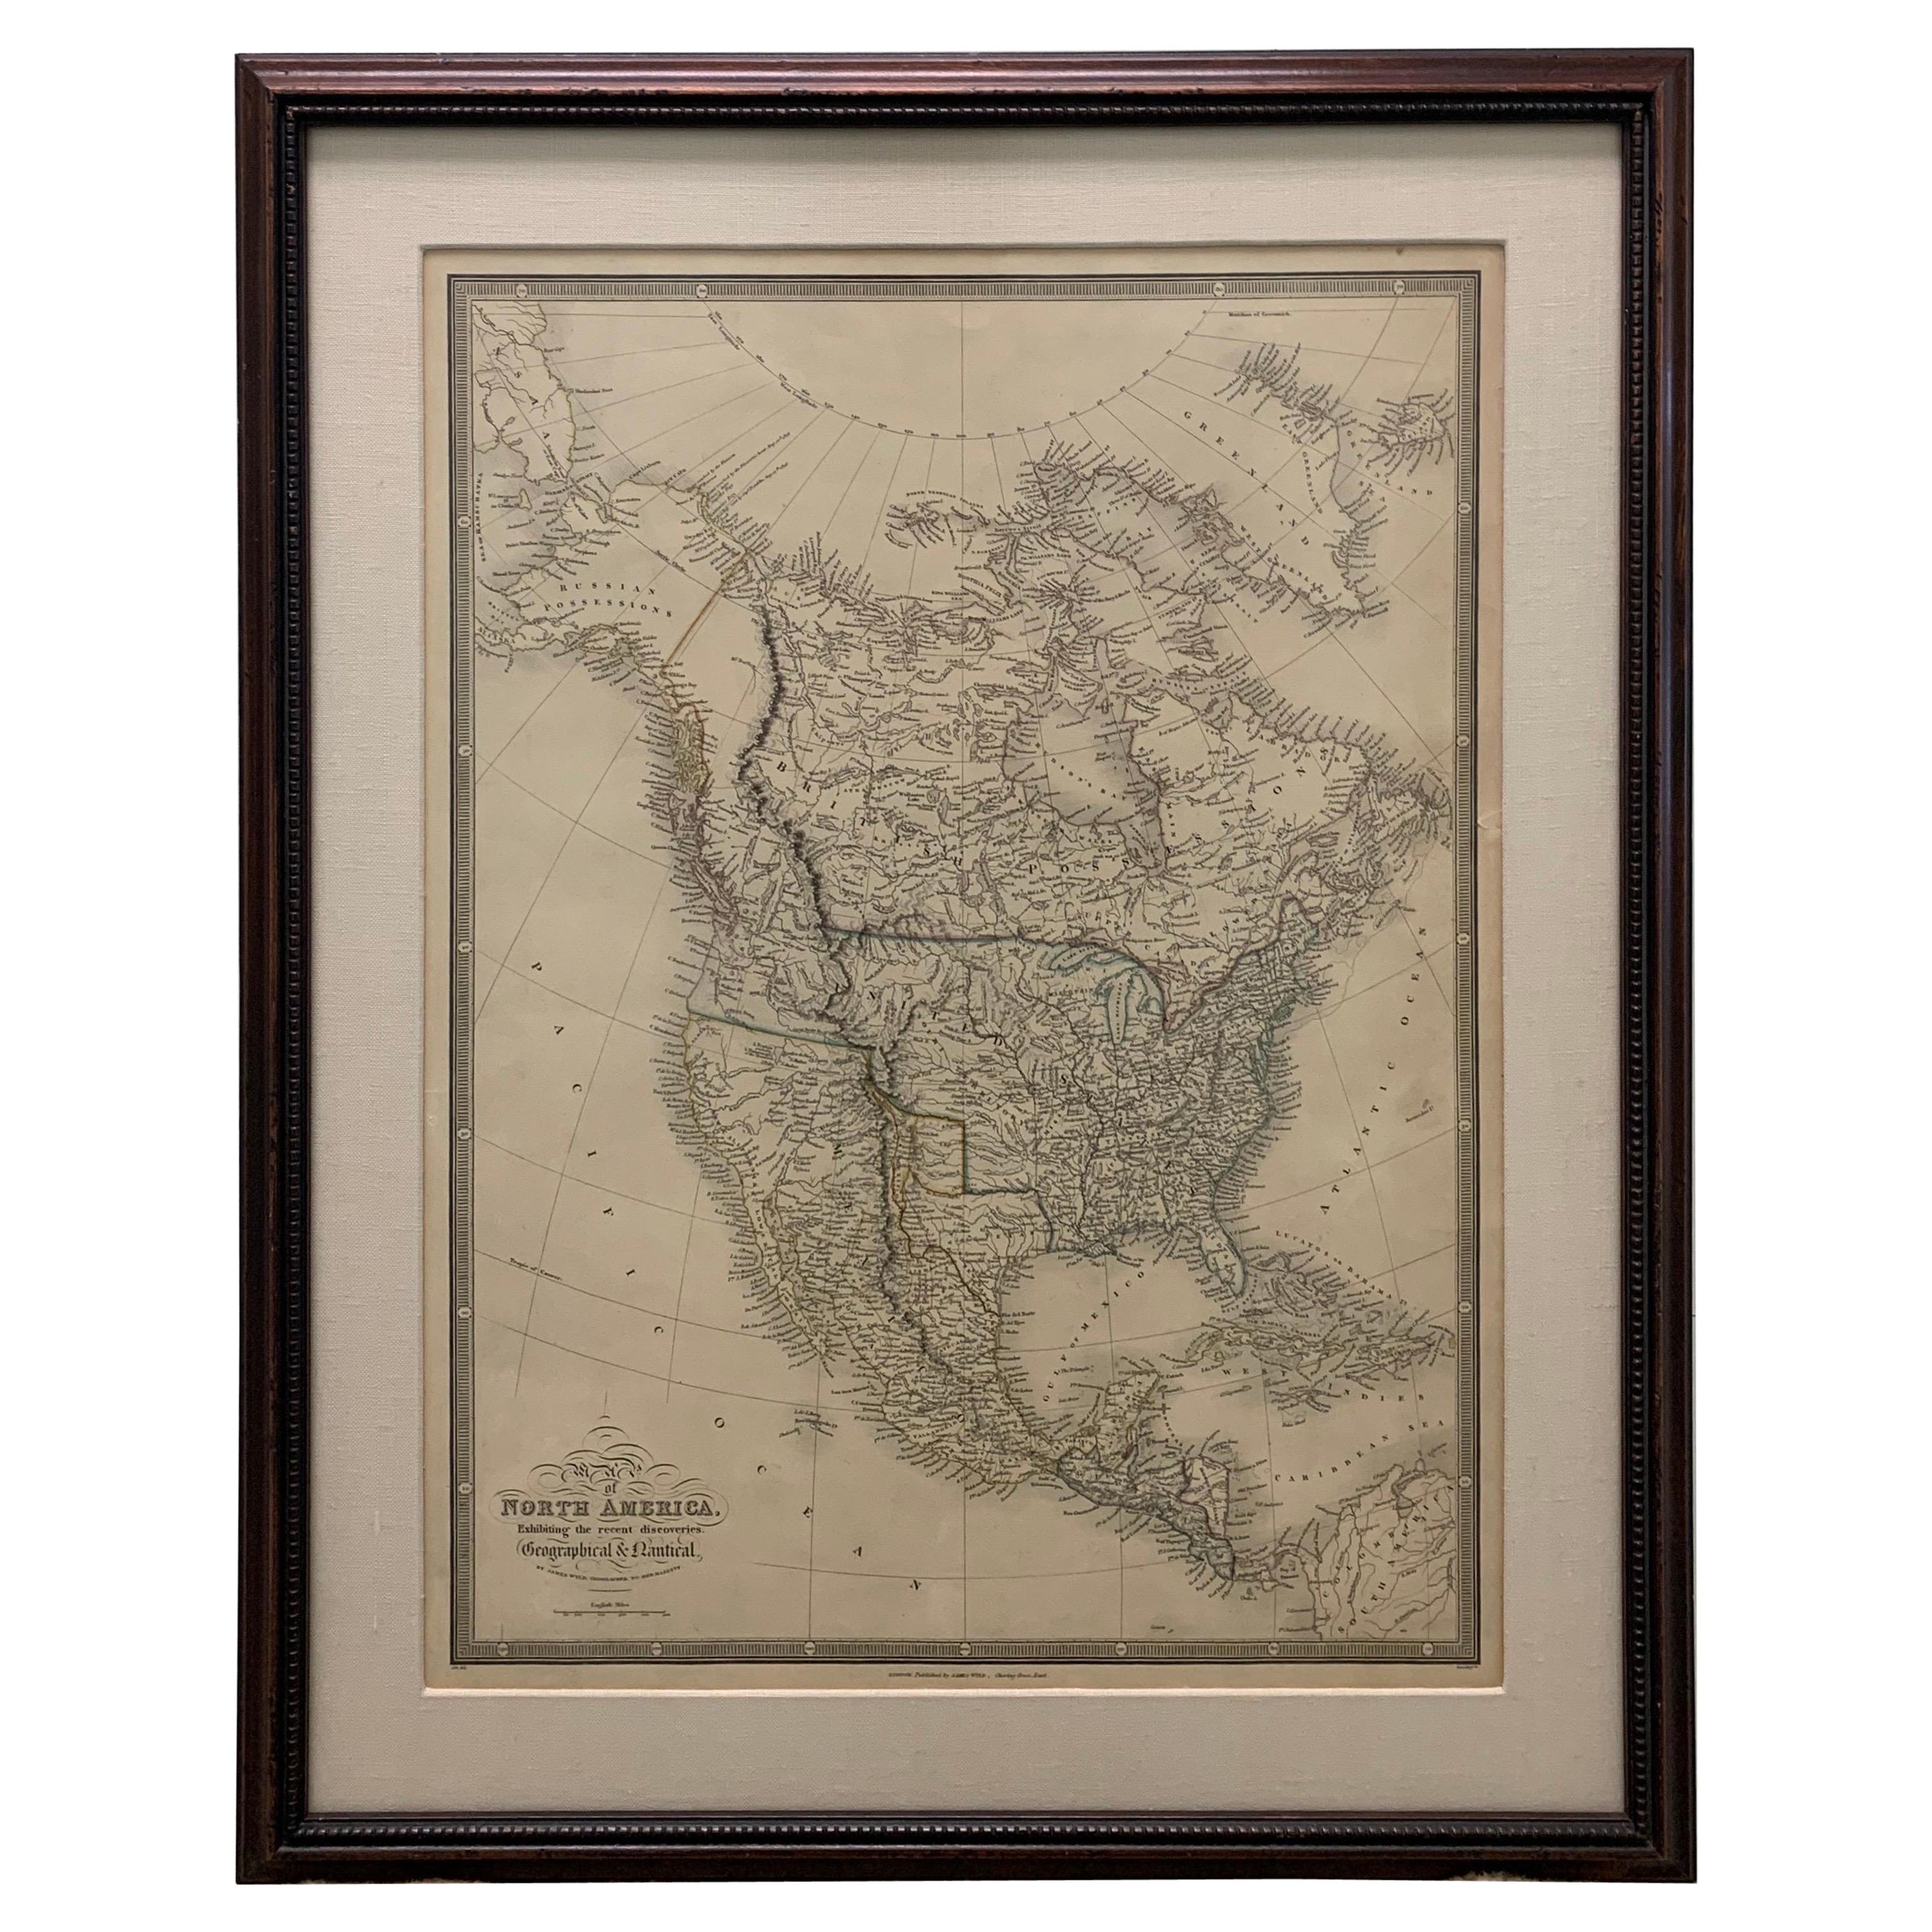 Framed 1838 North America & Recent Discoveries Map For Sale